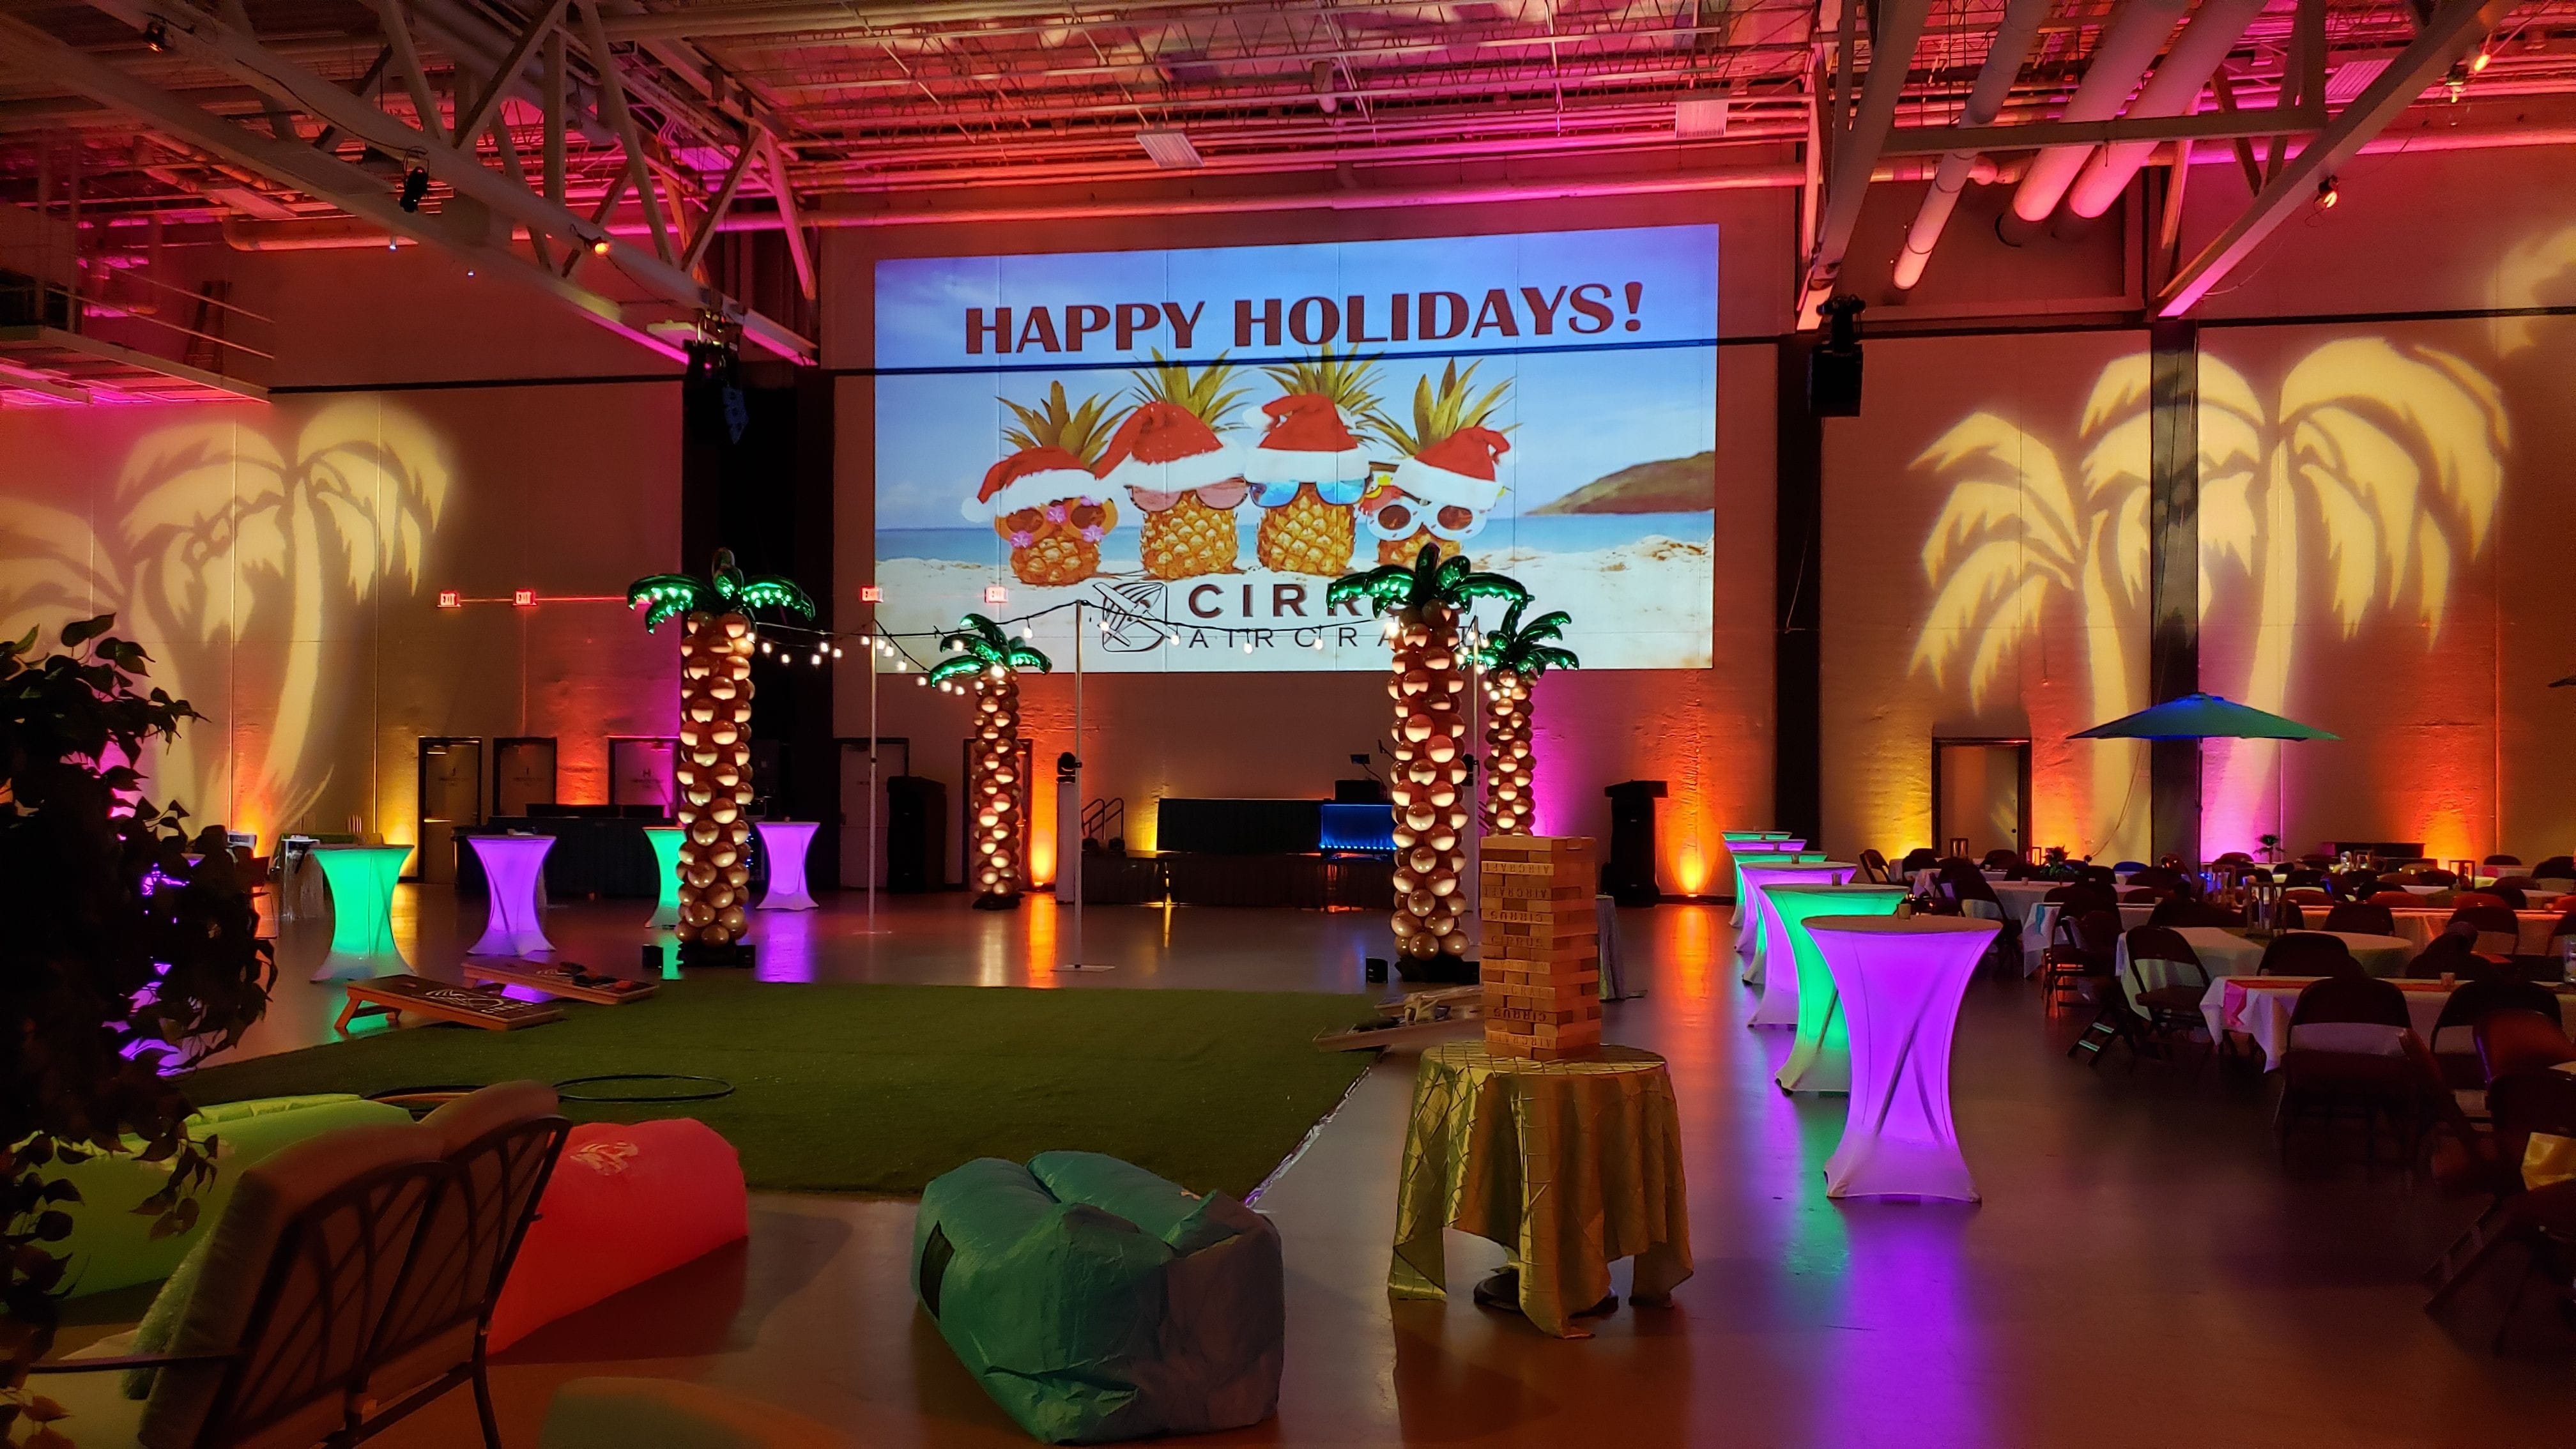 DECC Pioneer Hall.
Aloha Christmas.
Decorby Northland Special Events, video by AVR